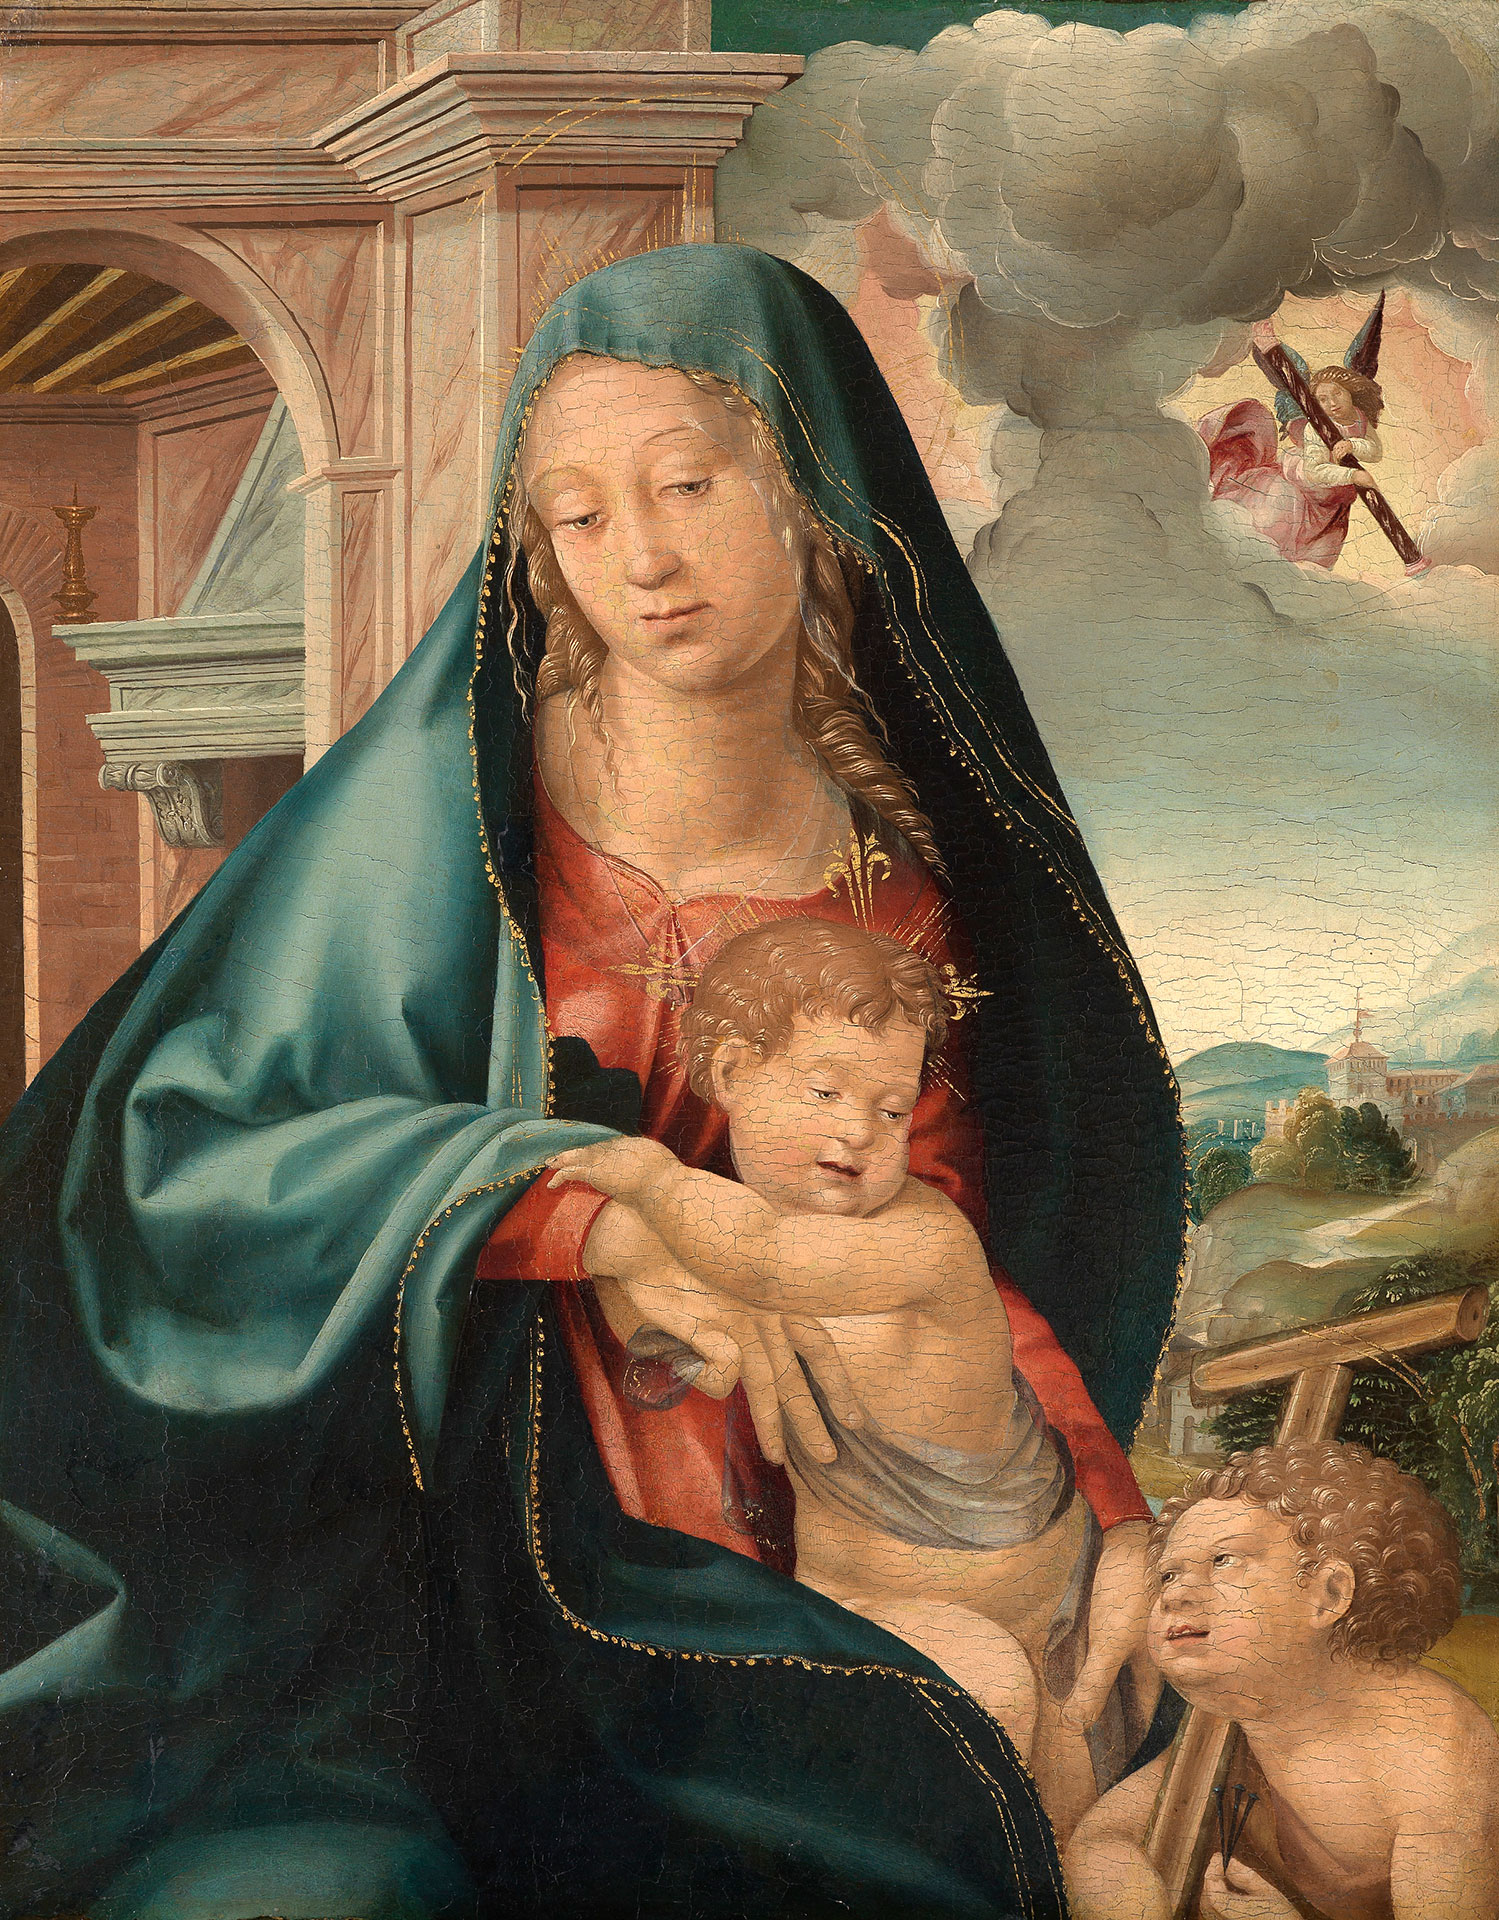 Illustration of the work "Maria with the child and the Johannesknaben" by Jörg Breu the Elder, created around 1520. Mary has the baby Jesus on her arm. Another child kneels in front of her and looks at Jesus. The work of art is located in the Staatliche Kunsthalle Karlsruhe.